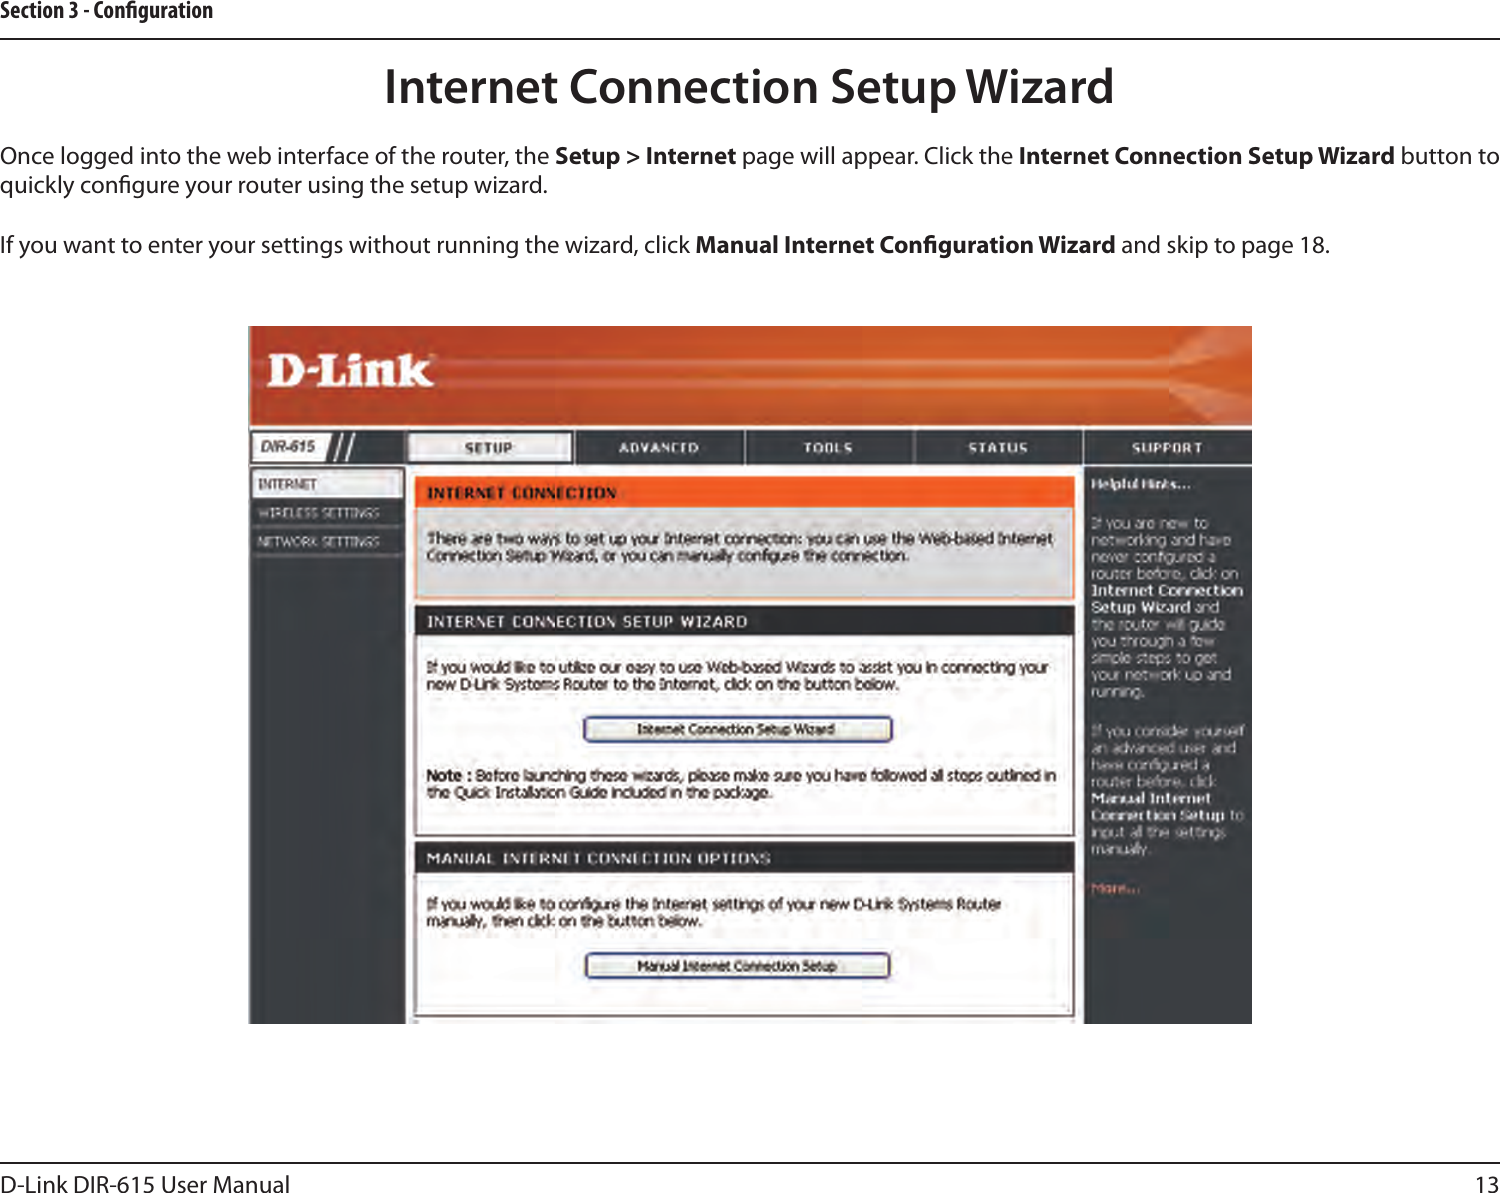 13D-Link DIR-615 User ManualSection 3 - CongurationInternet Connection Setup WizardOnce logged into the web interface of the router, the Setup &gt; Internet page will appear. Click the Internet Connection Setup Wizard button to quickly congure your router using the setup wizard.If you want to enter your settings without running the wizard, click Manual Internet Conguration Wizard and skip to page 18.